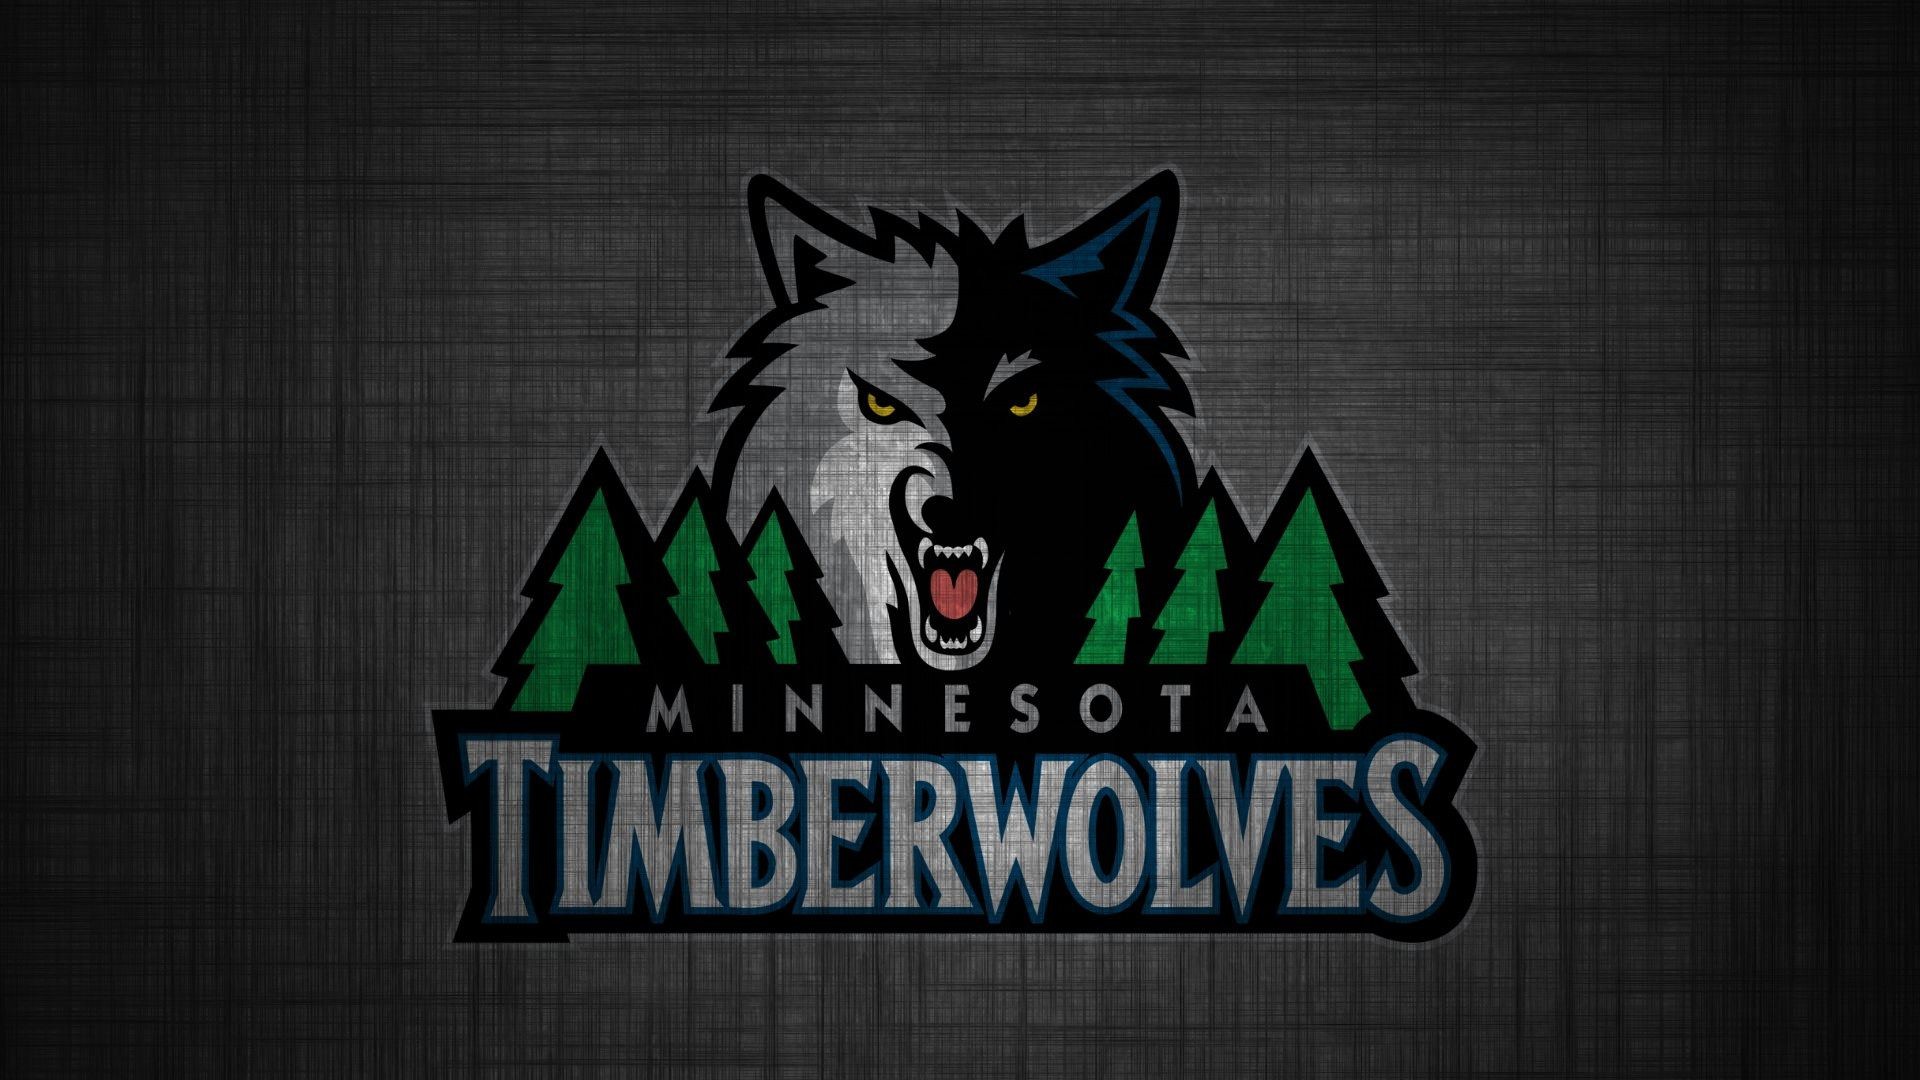 Download Minnesota Timberwolves wallpapers for mobile phone free  Minnesota Timberwolves HD pictures